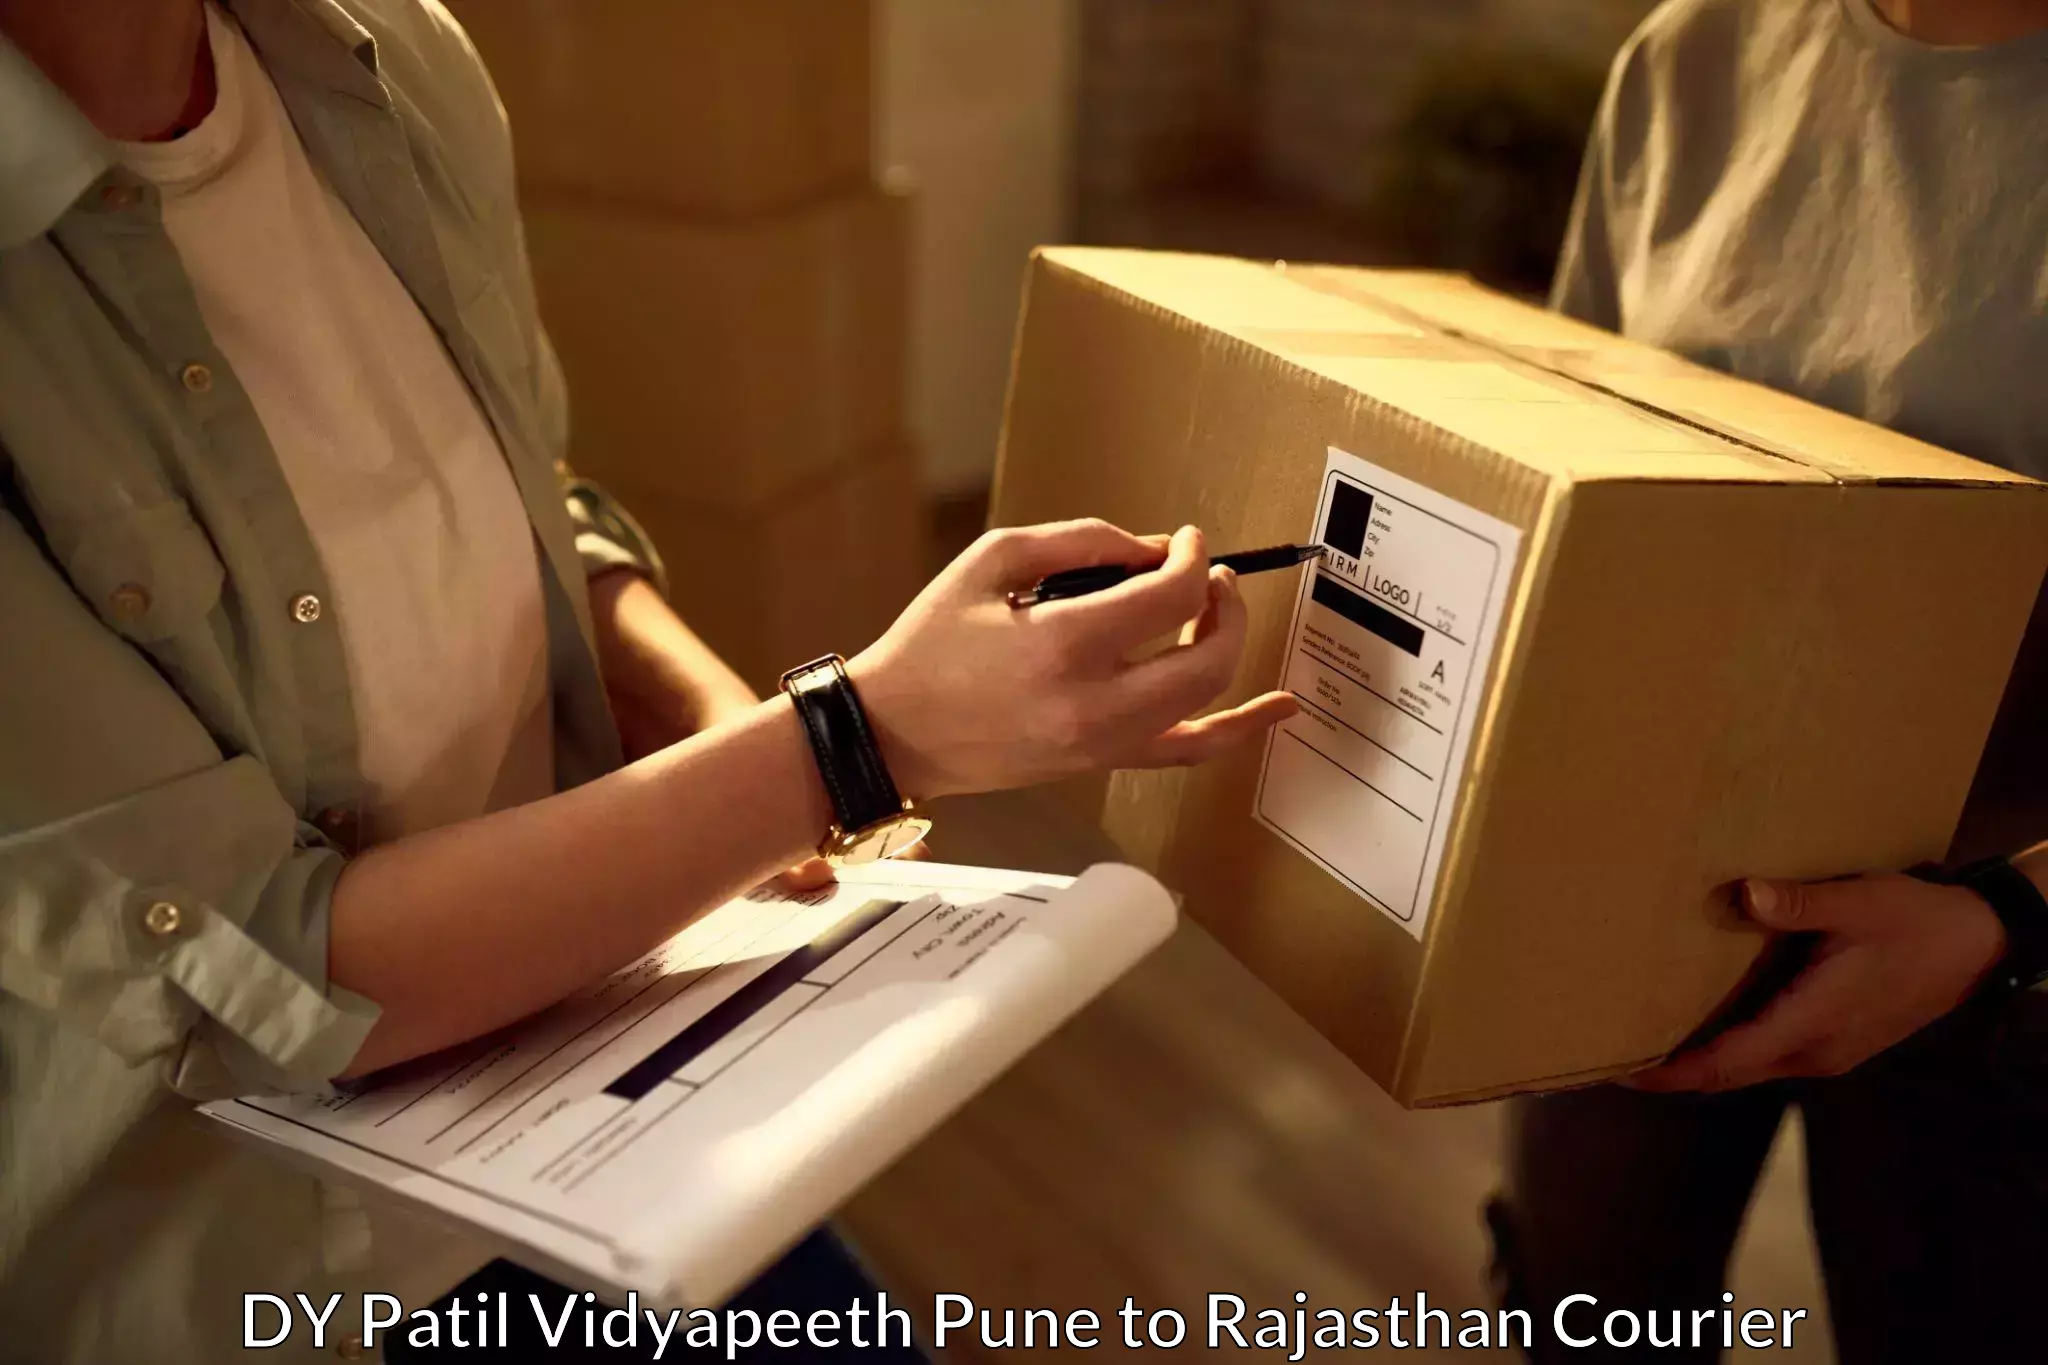 Global courier networks DY Patil Vidyapeeth Pune to NIT Jaipur